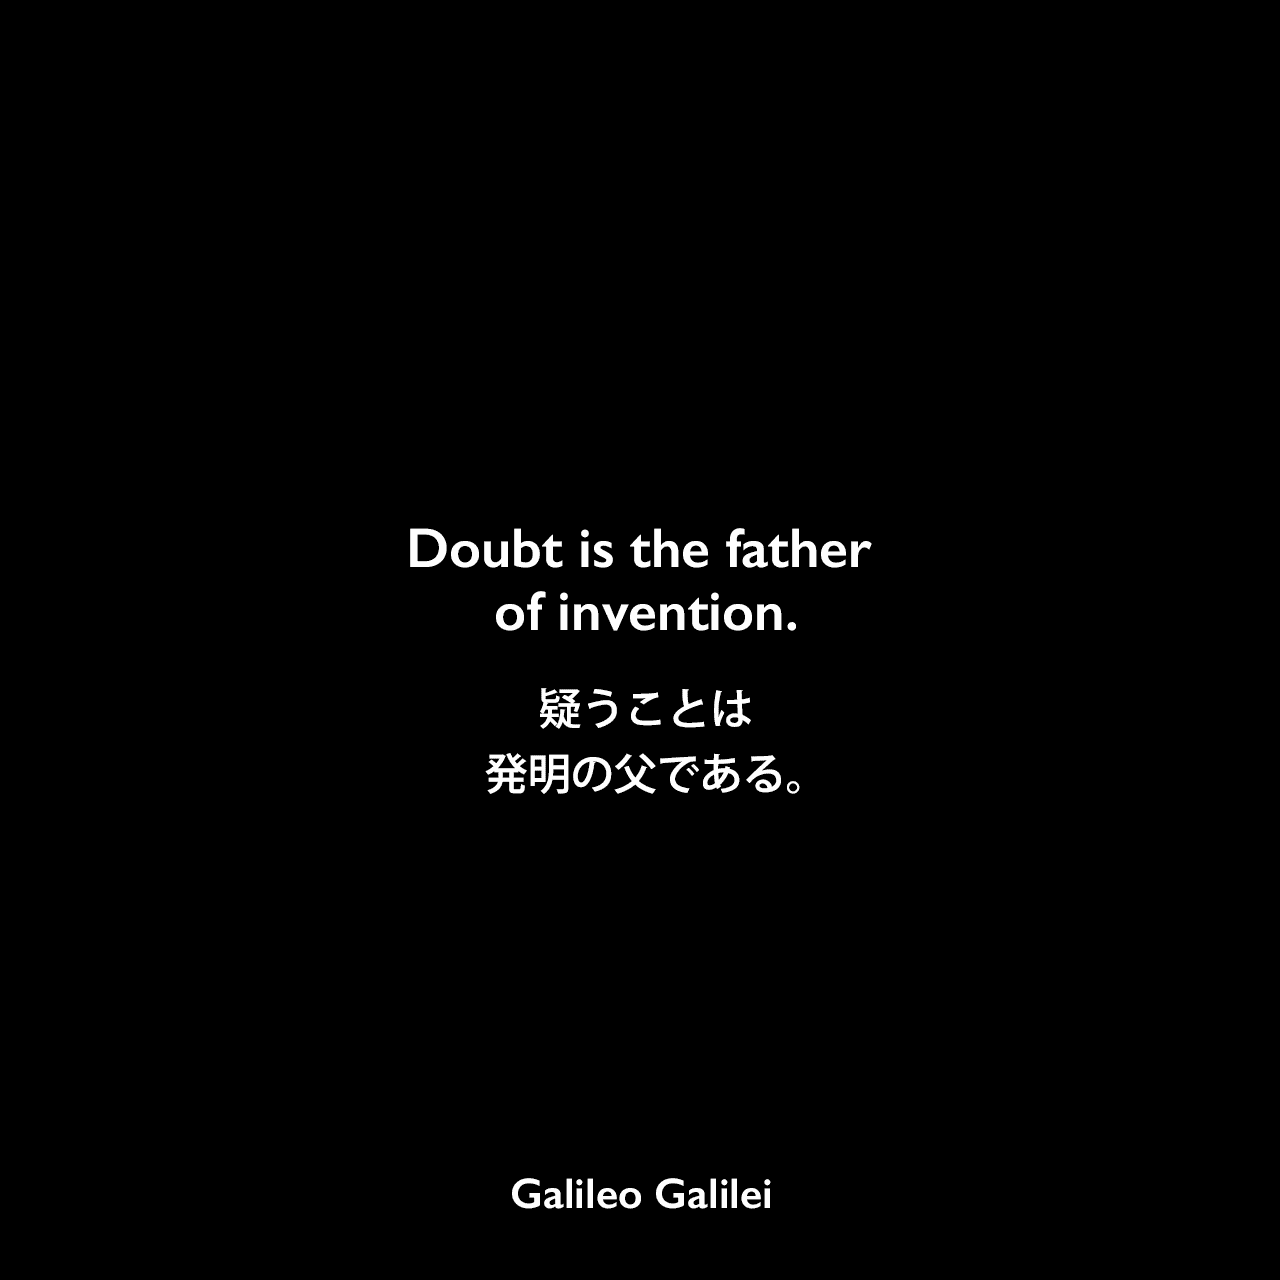 Doubt is the father of invention.疑うことは発明の父である。